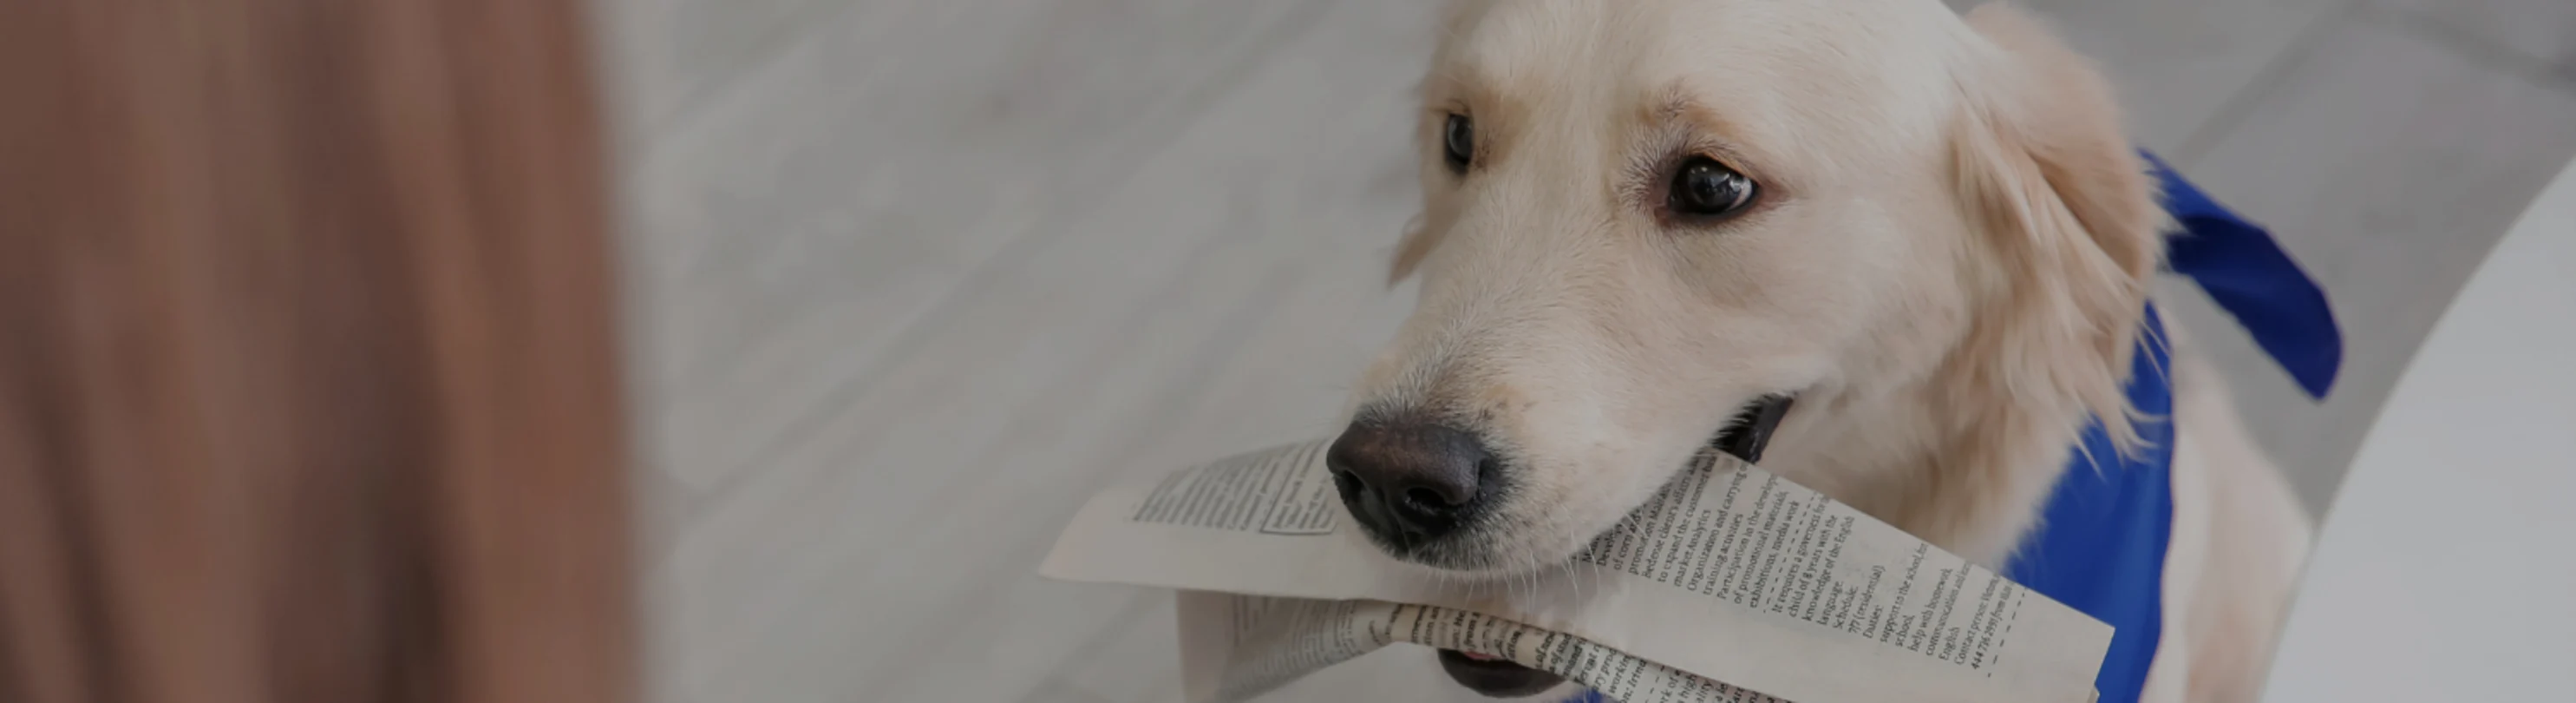 White dog with a blue bandana on  holding a newspaper in its mouth 